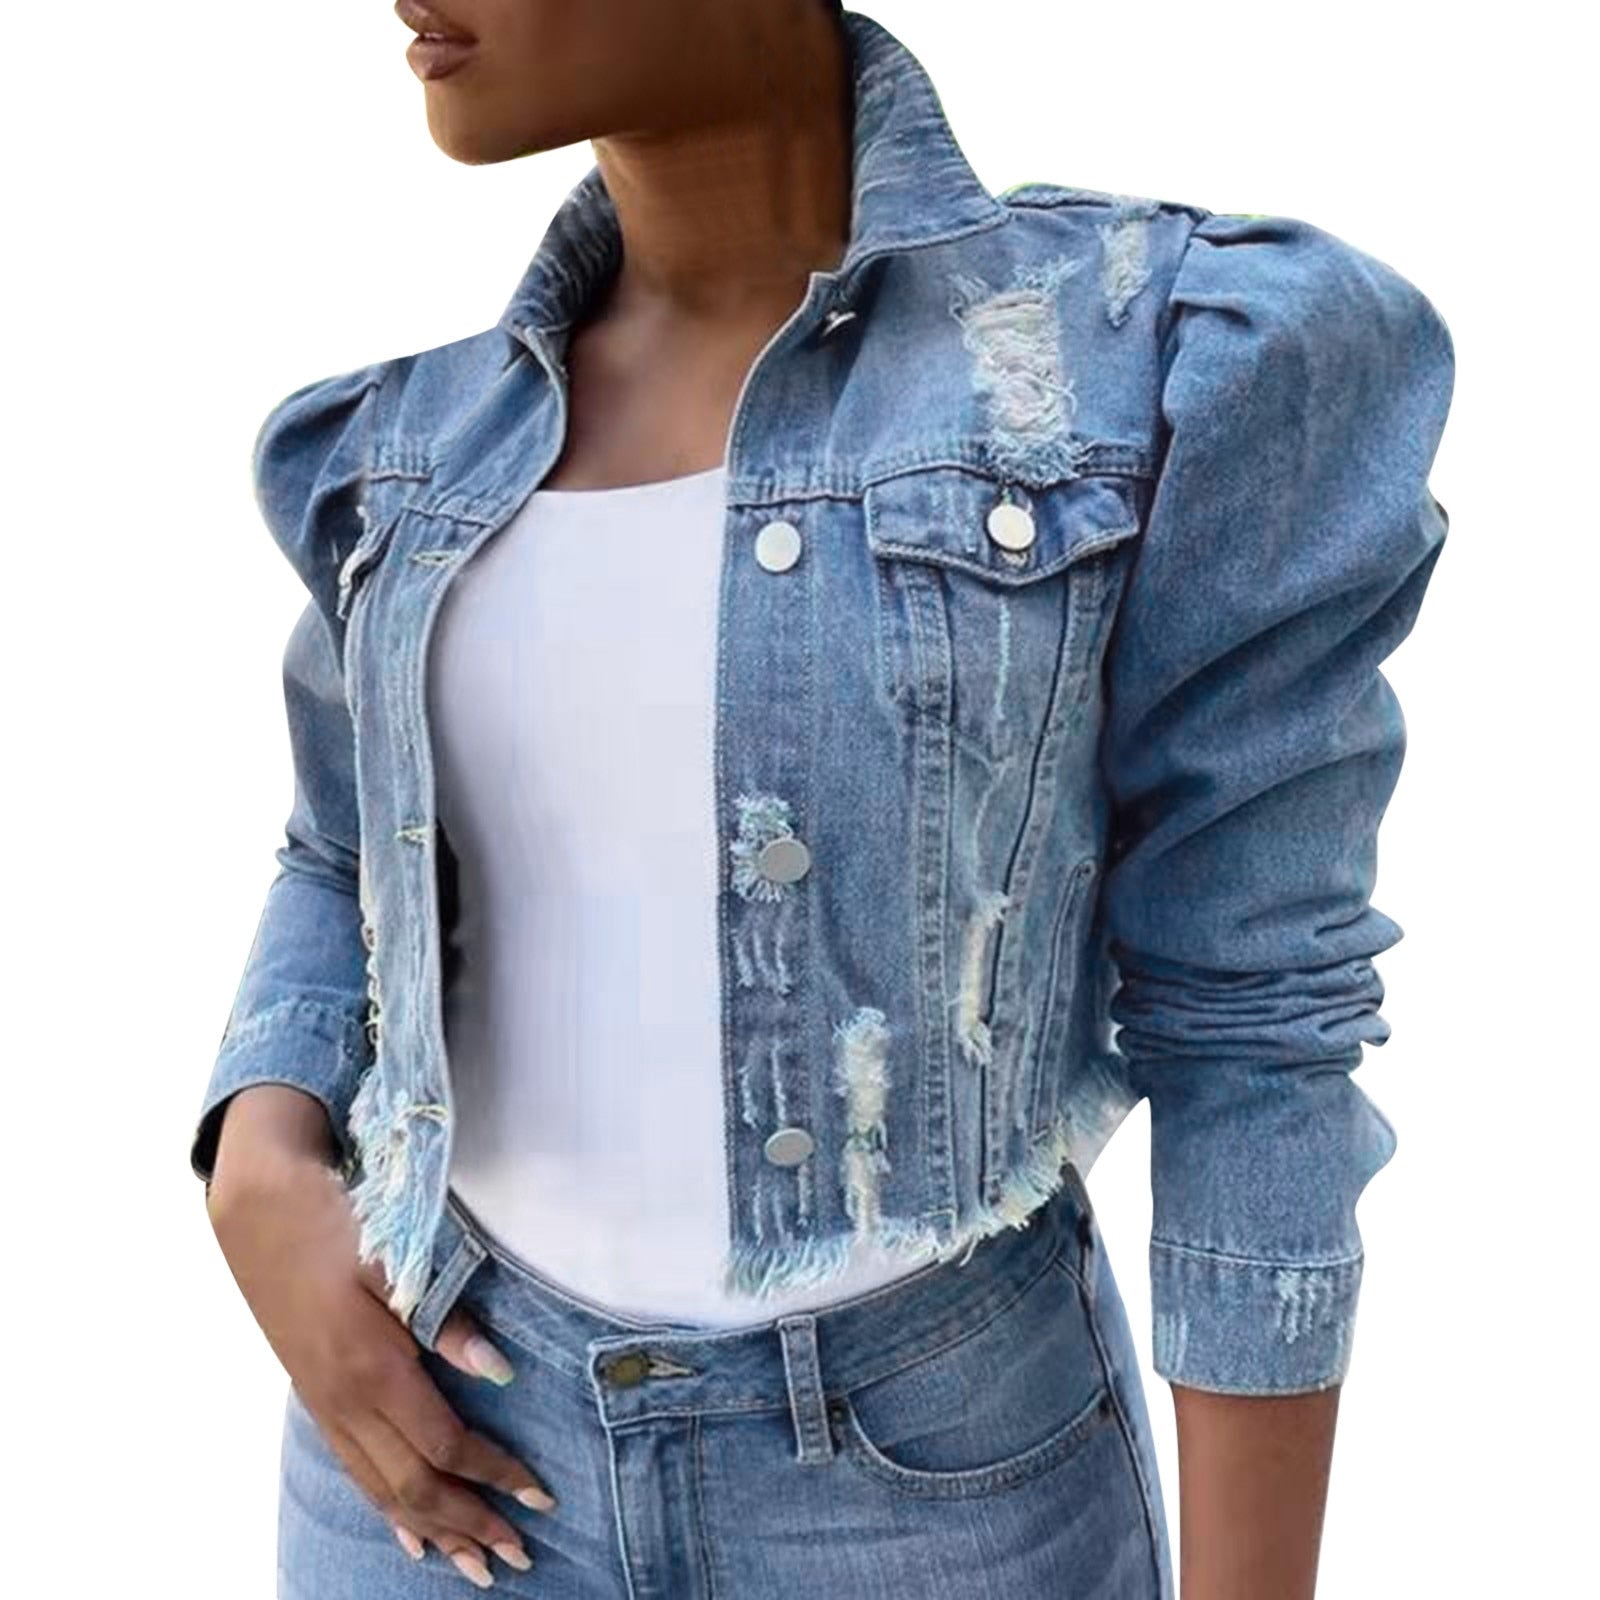 Billlnai Womne's Vintage Retro Hand-Washed Denim Coats Ladies Slim Long Sleeved Ripped Jeans Jackets High Street Single Breasted Tops